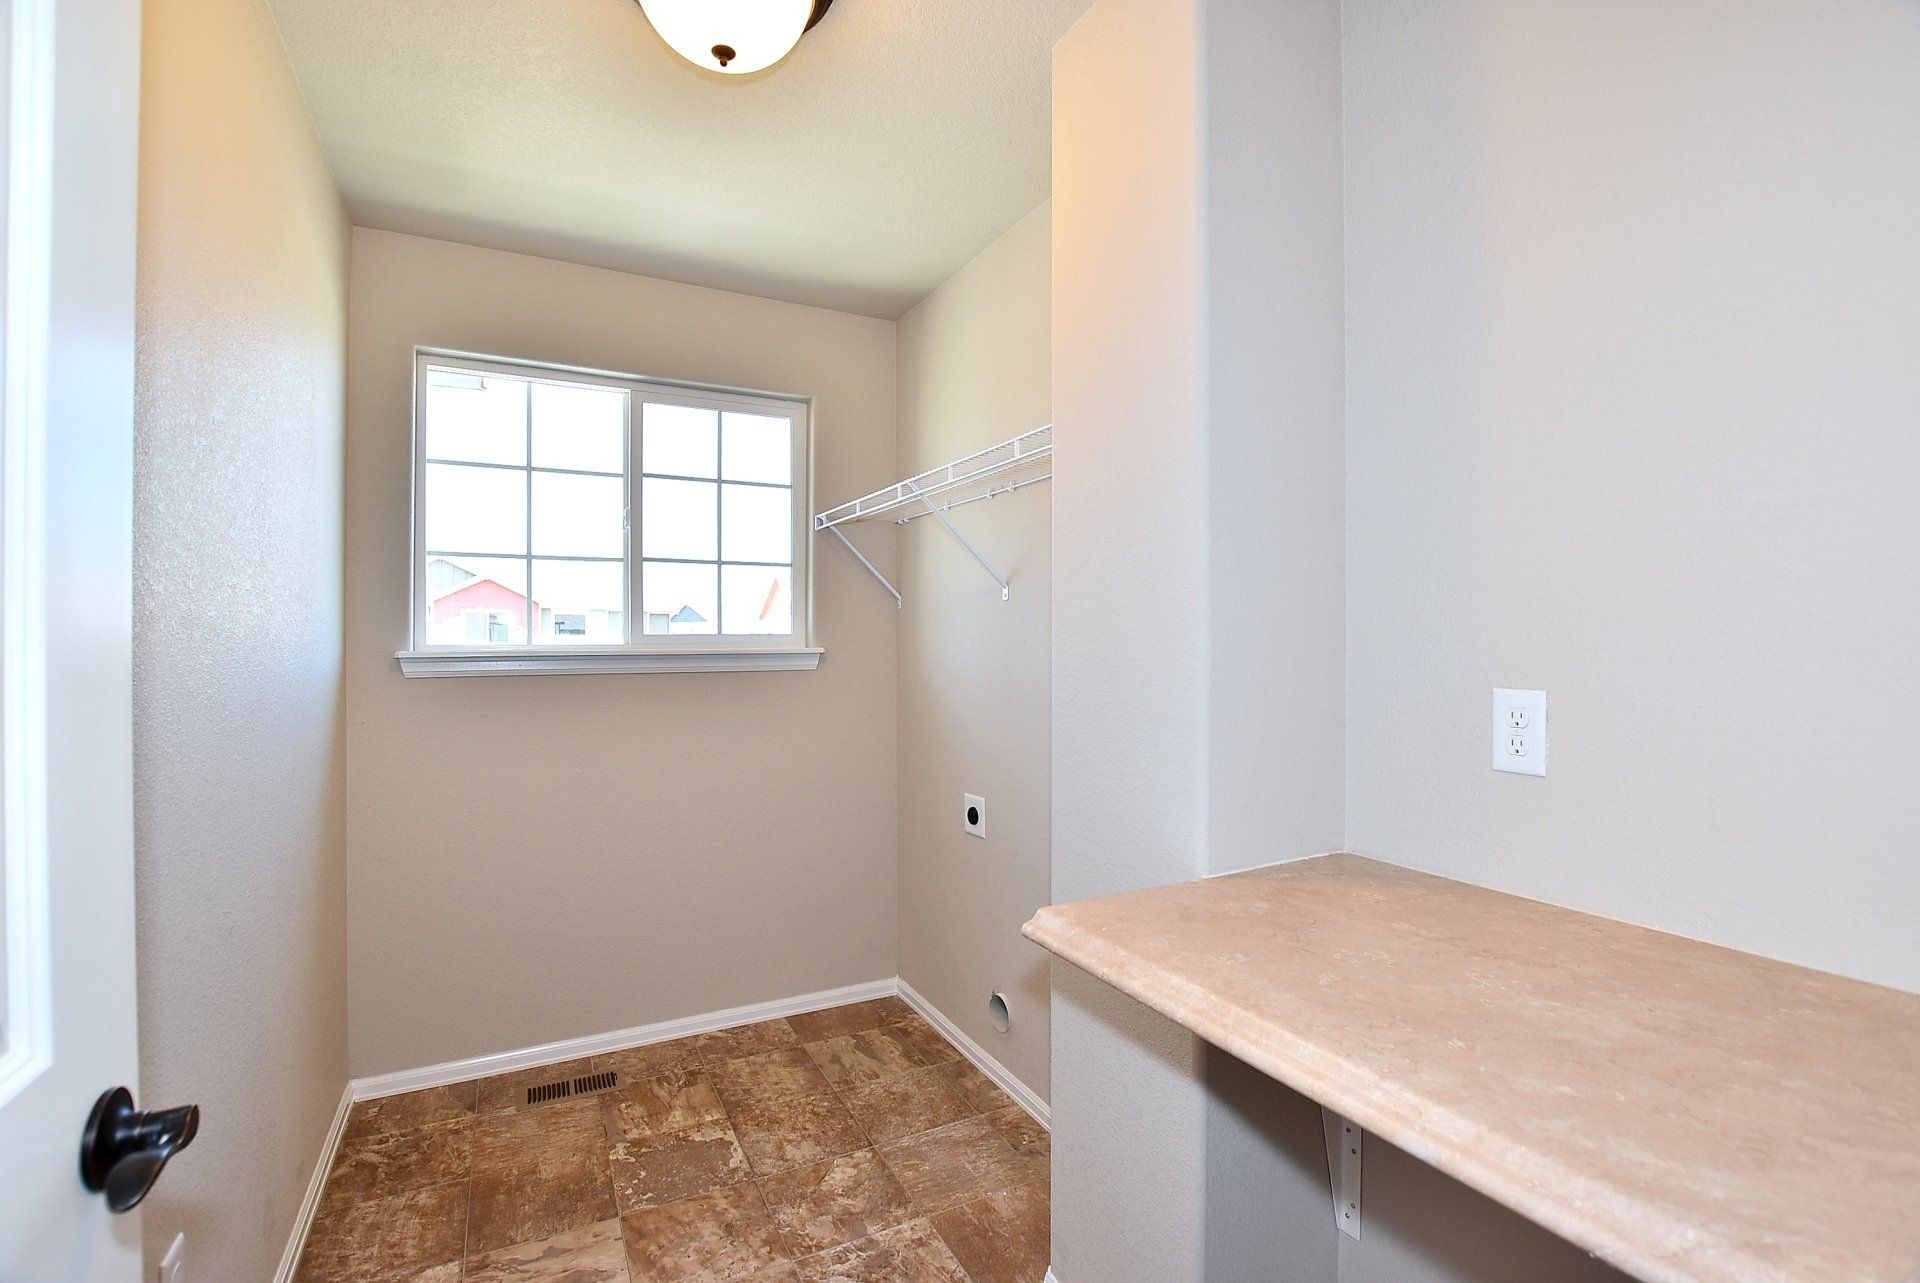 Laundry room with tile flooring